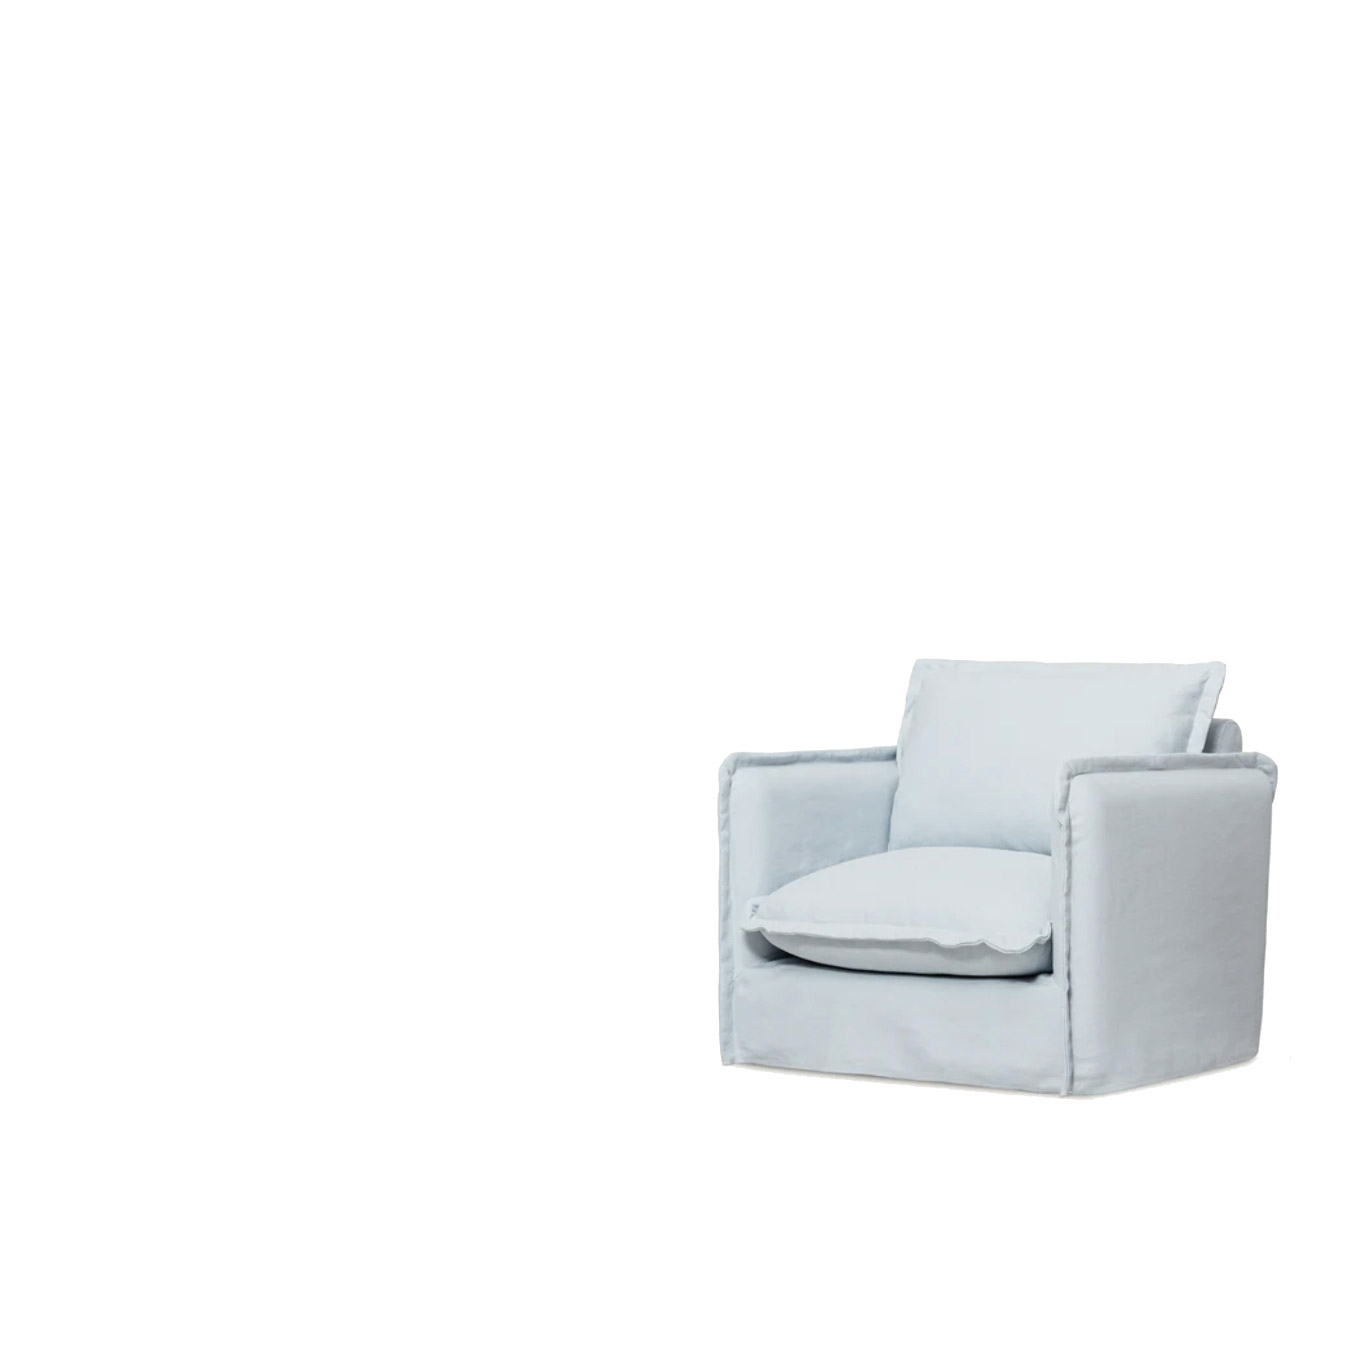 Little Neva Chair featured in Cubby